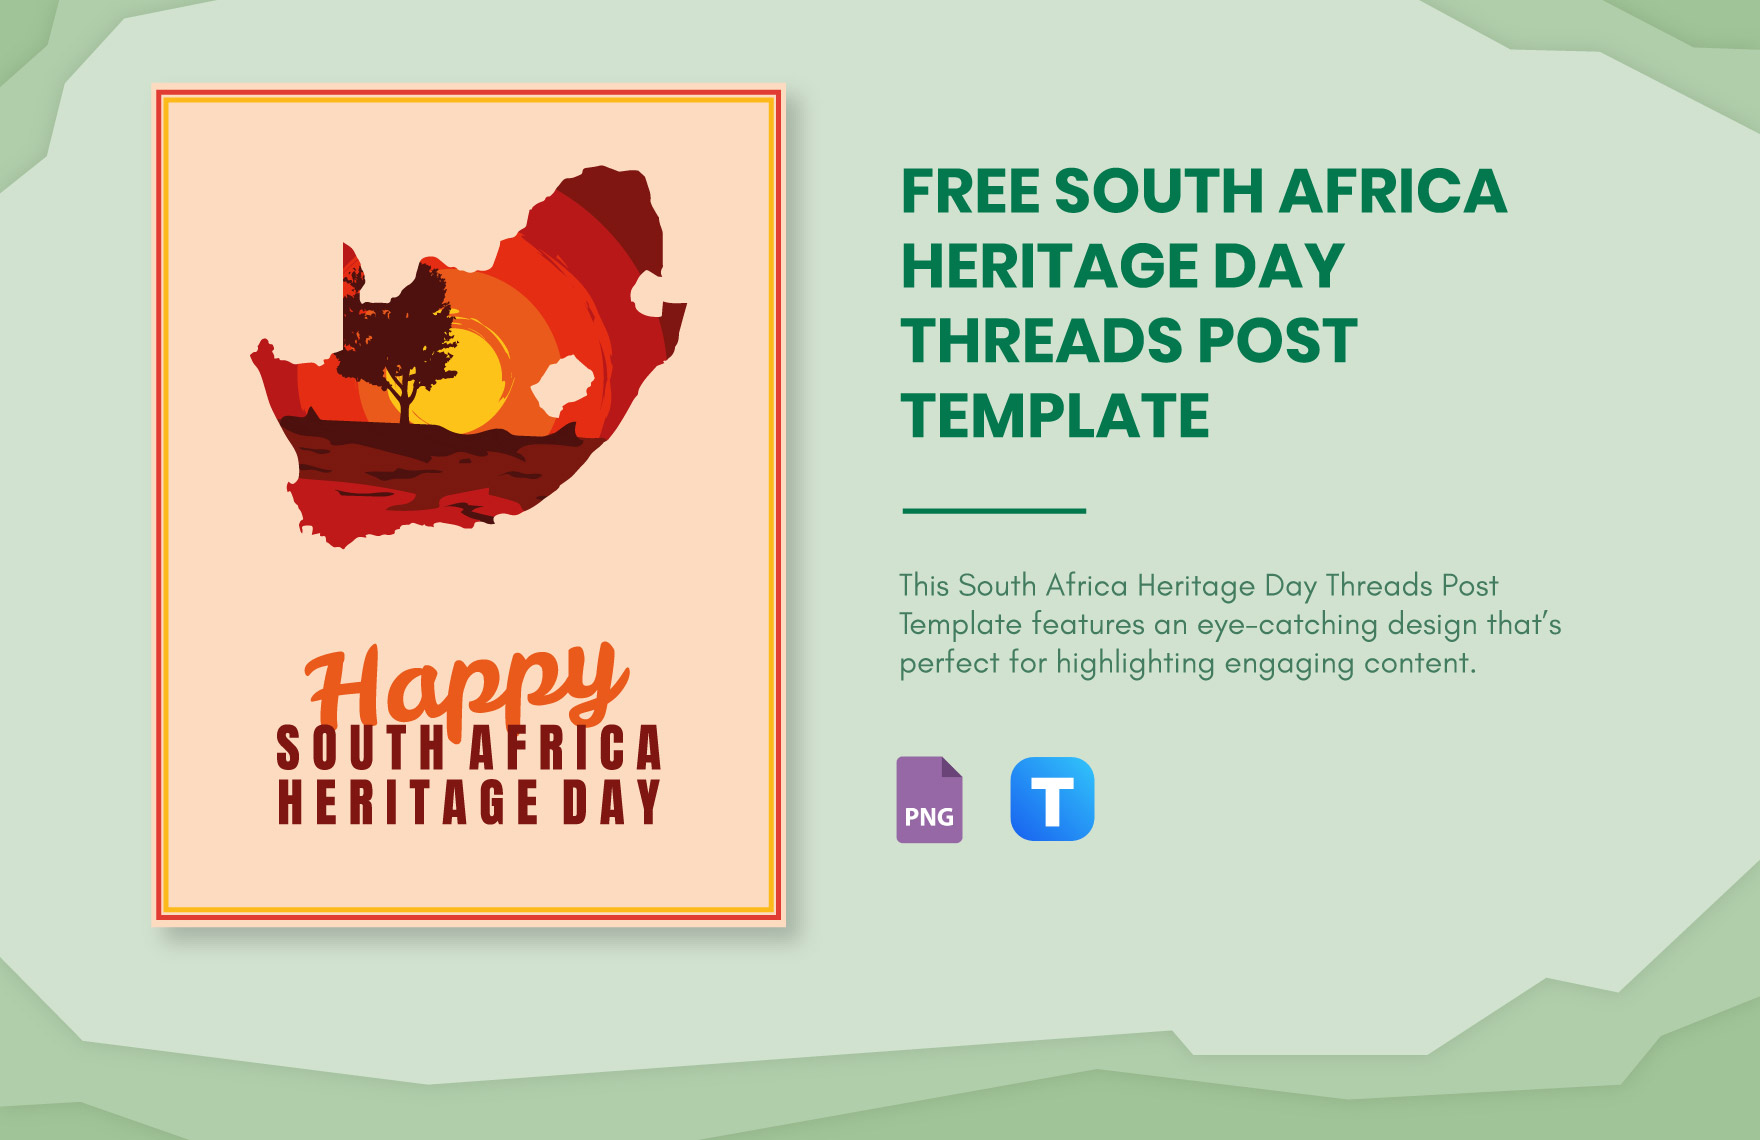 Free South Africa Heritage Day Threads Post Template in PNG